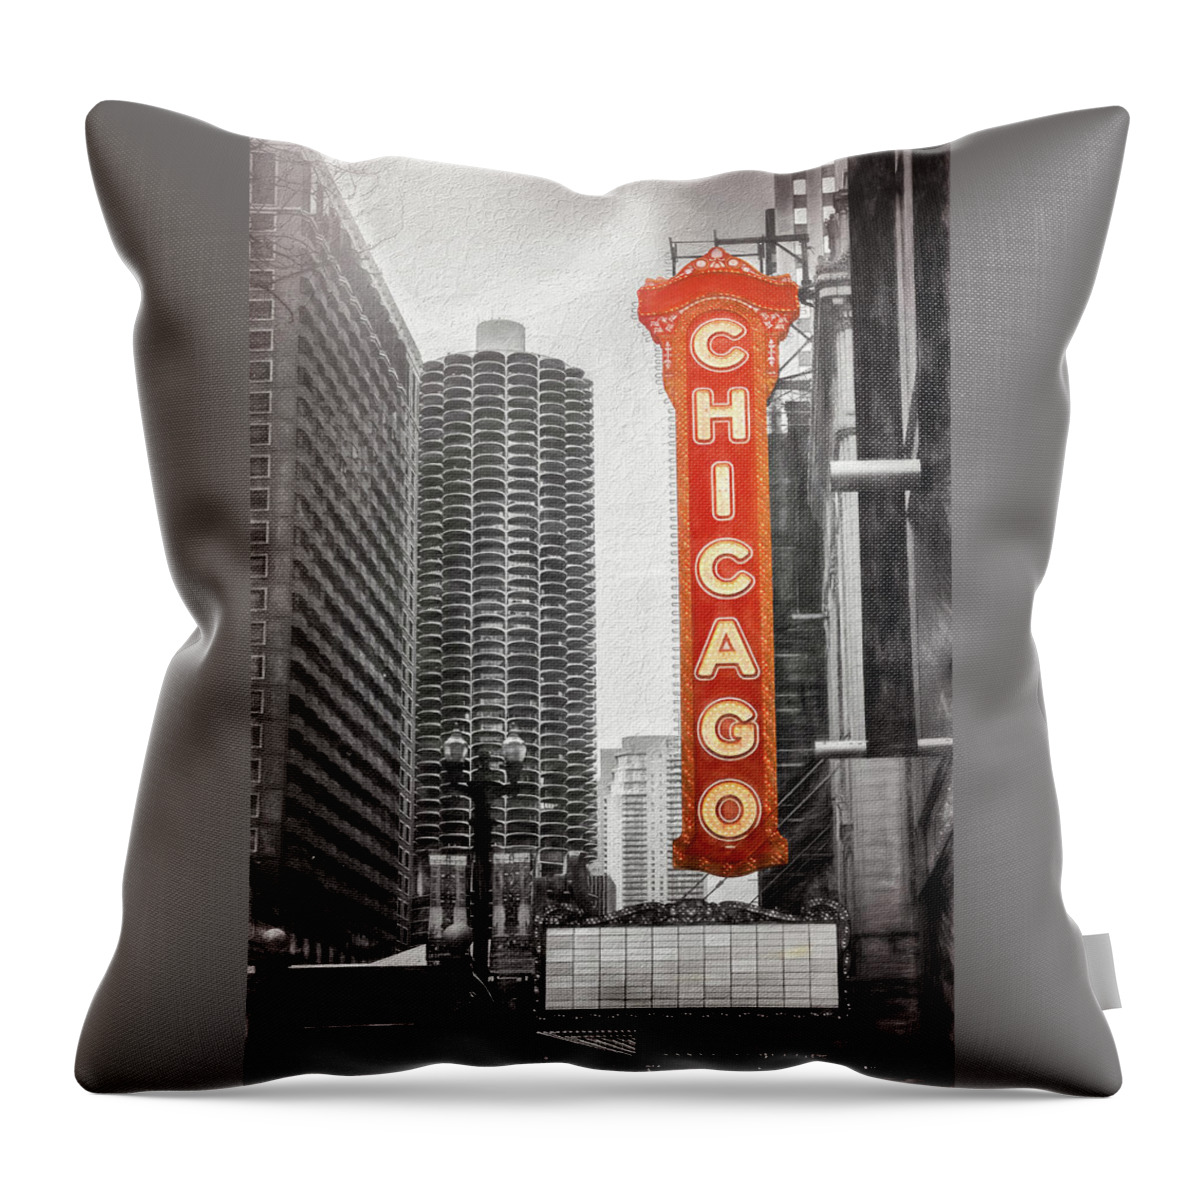 Chicago Throw Pillow featuring the photograph Chicago Theatre Sign Chicago Black and White by Carol Japp